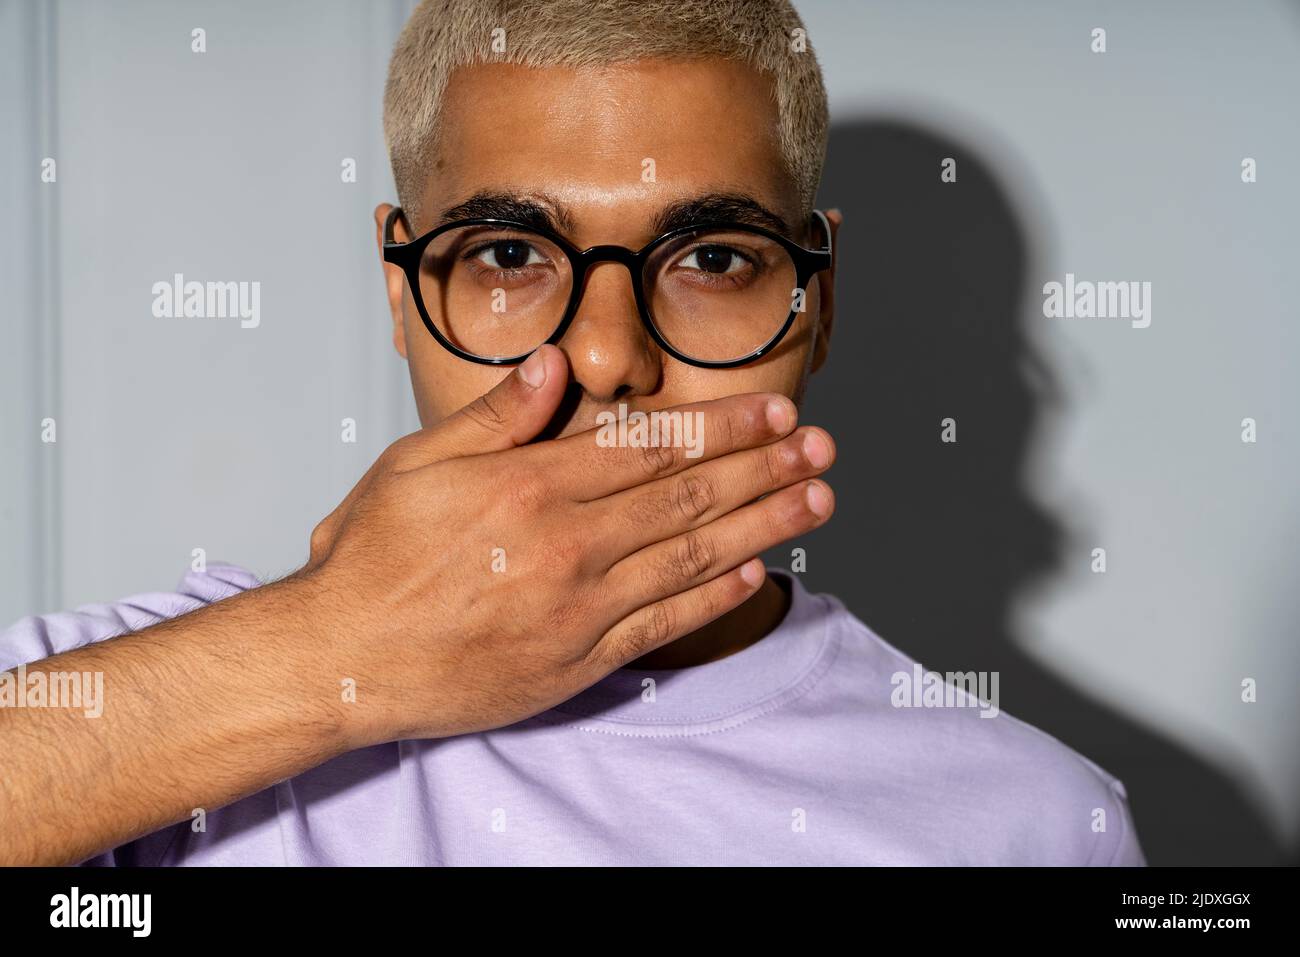 Young man covering mouth with hand in front of wall Stock Photo